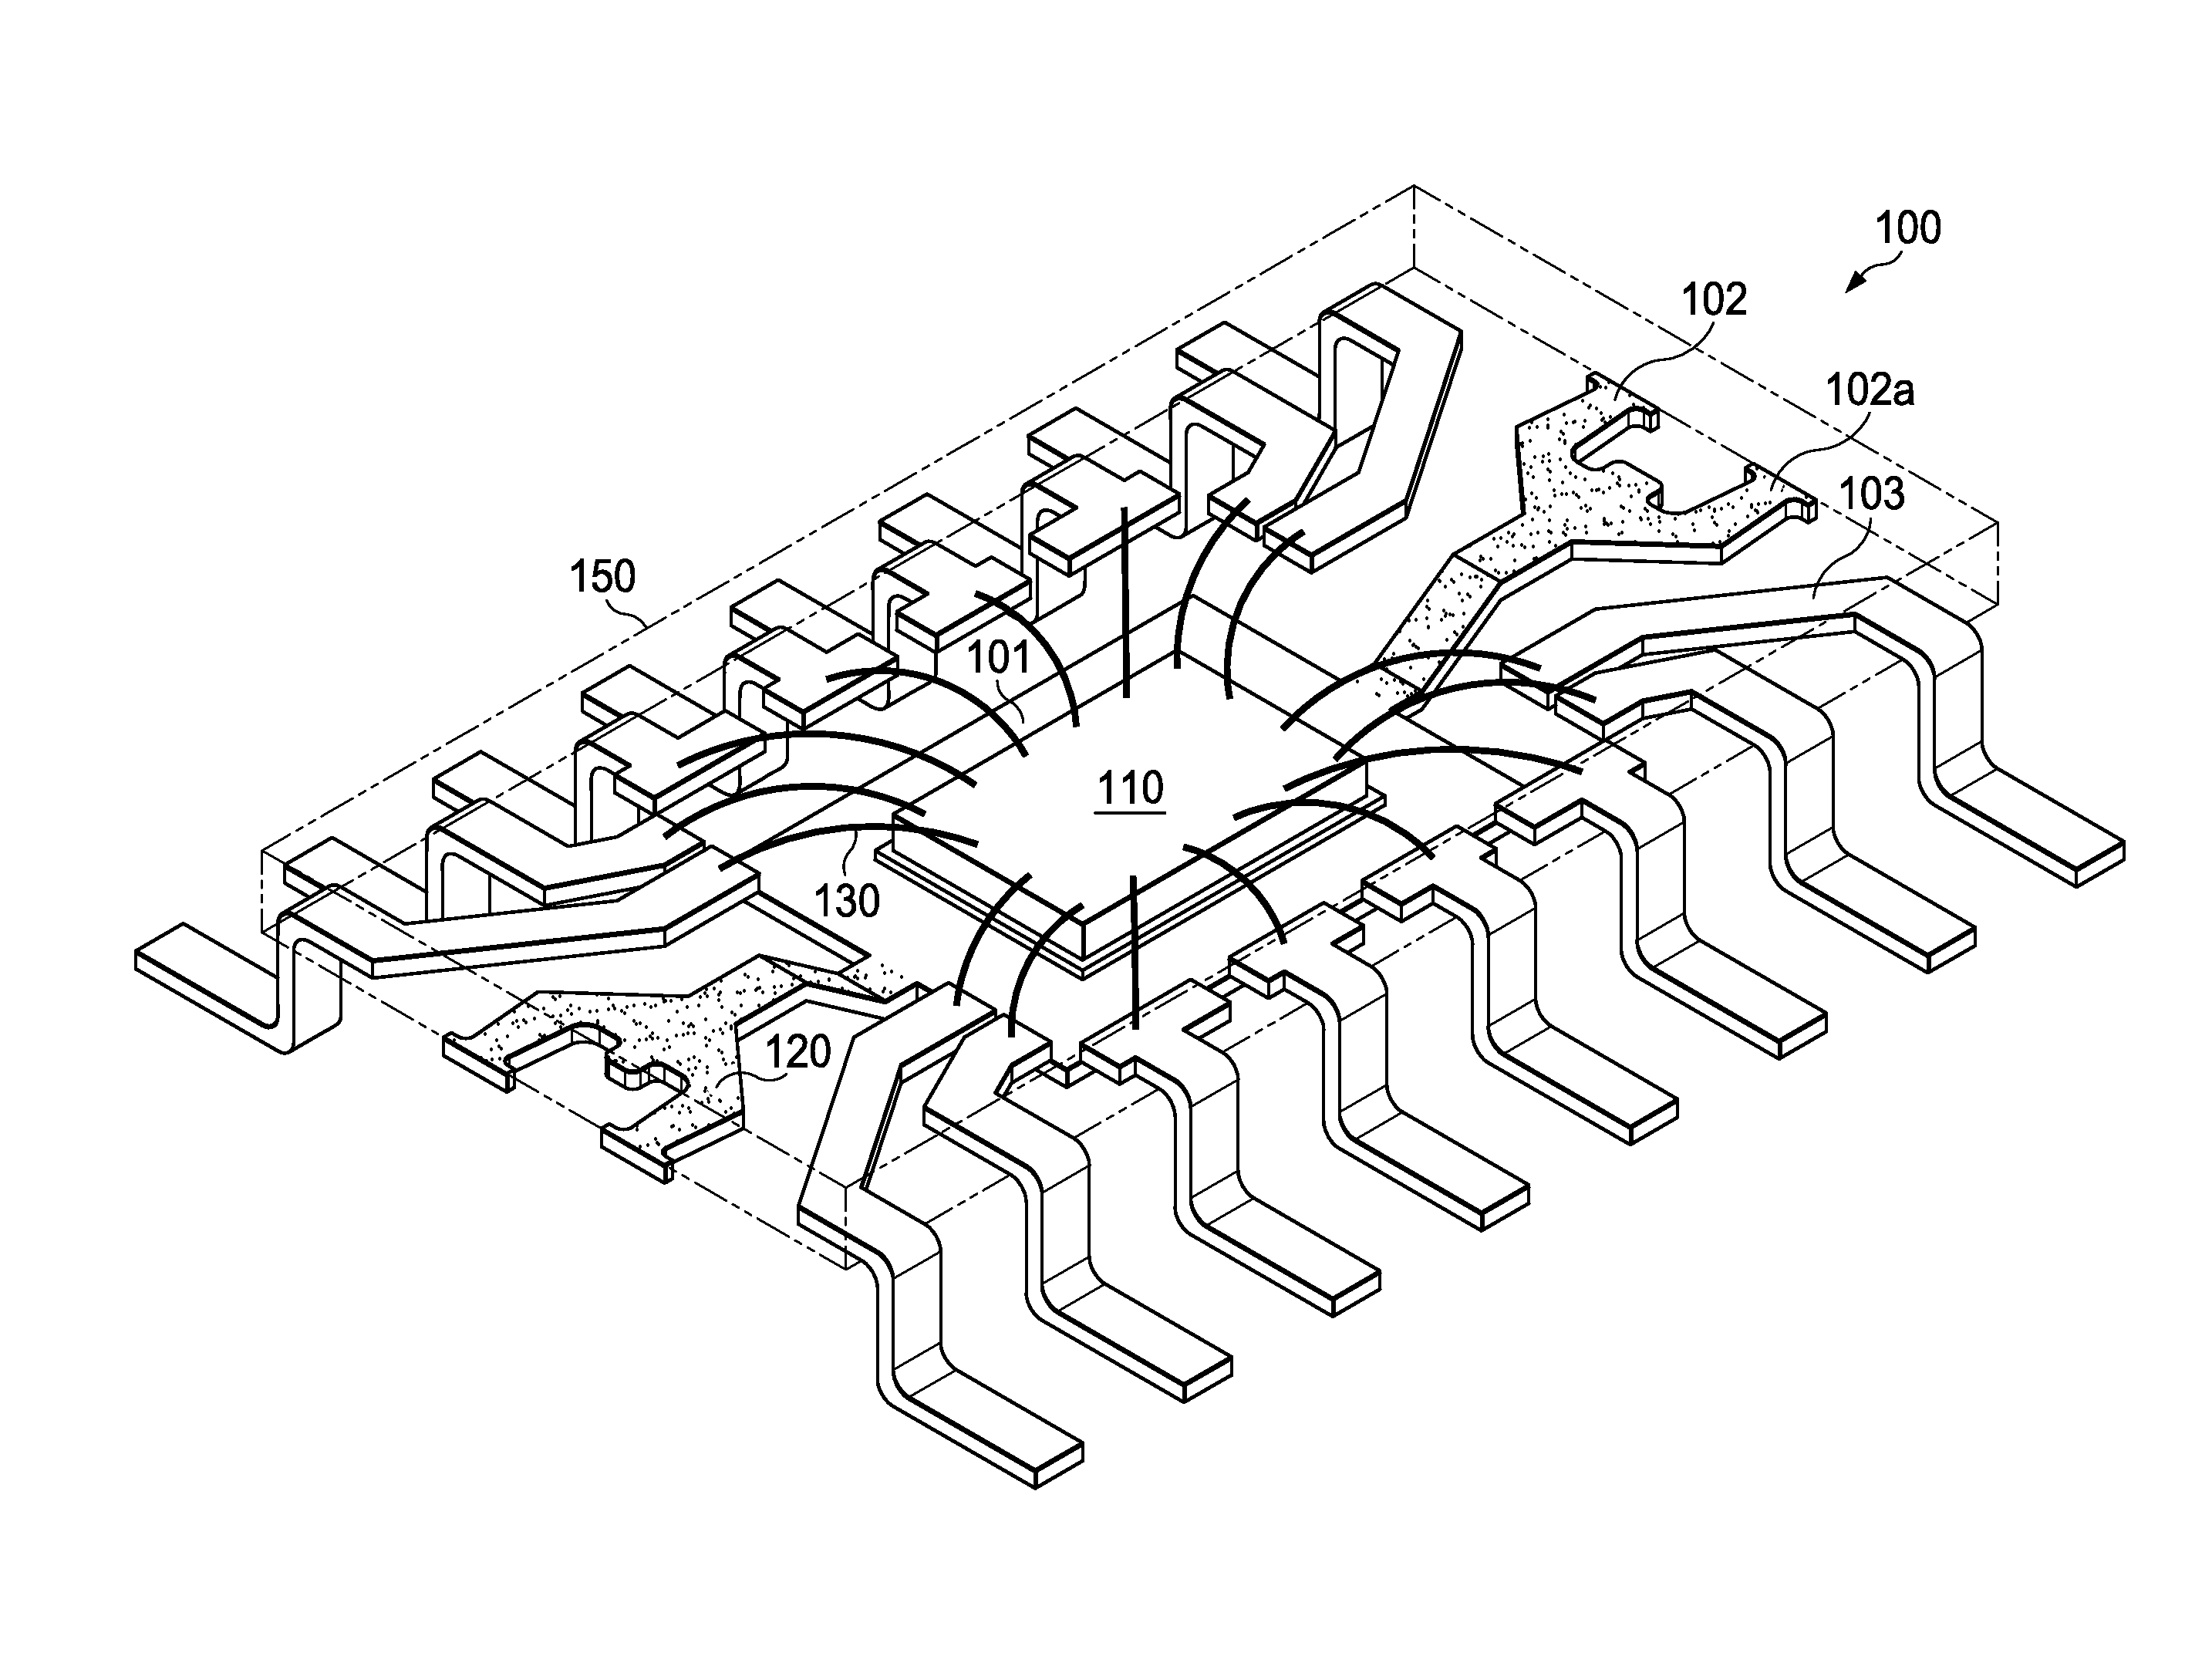 Packaged semiconductor device having leadframe features as pressure valves against delamination